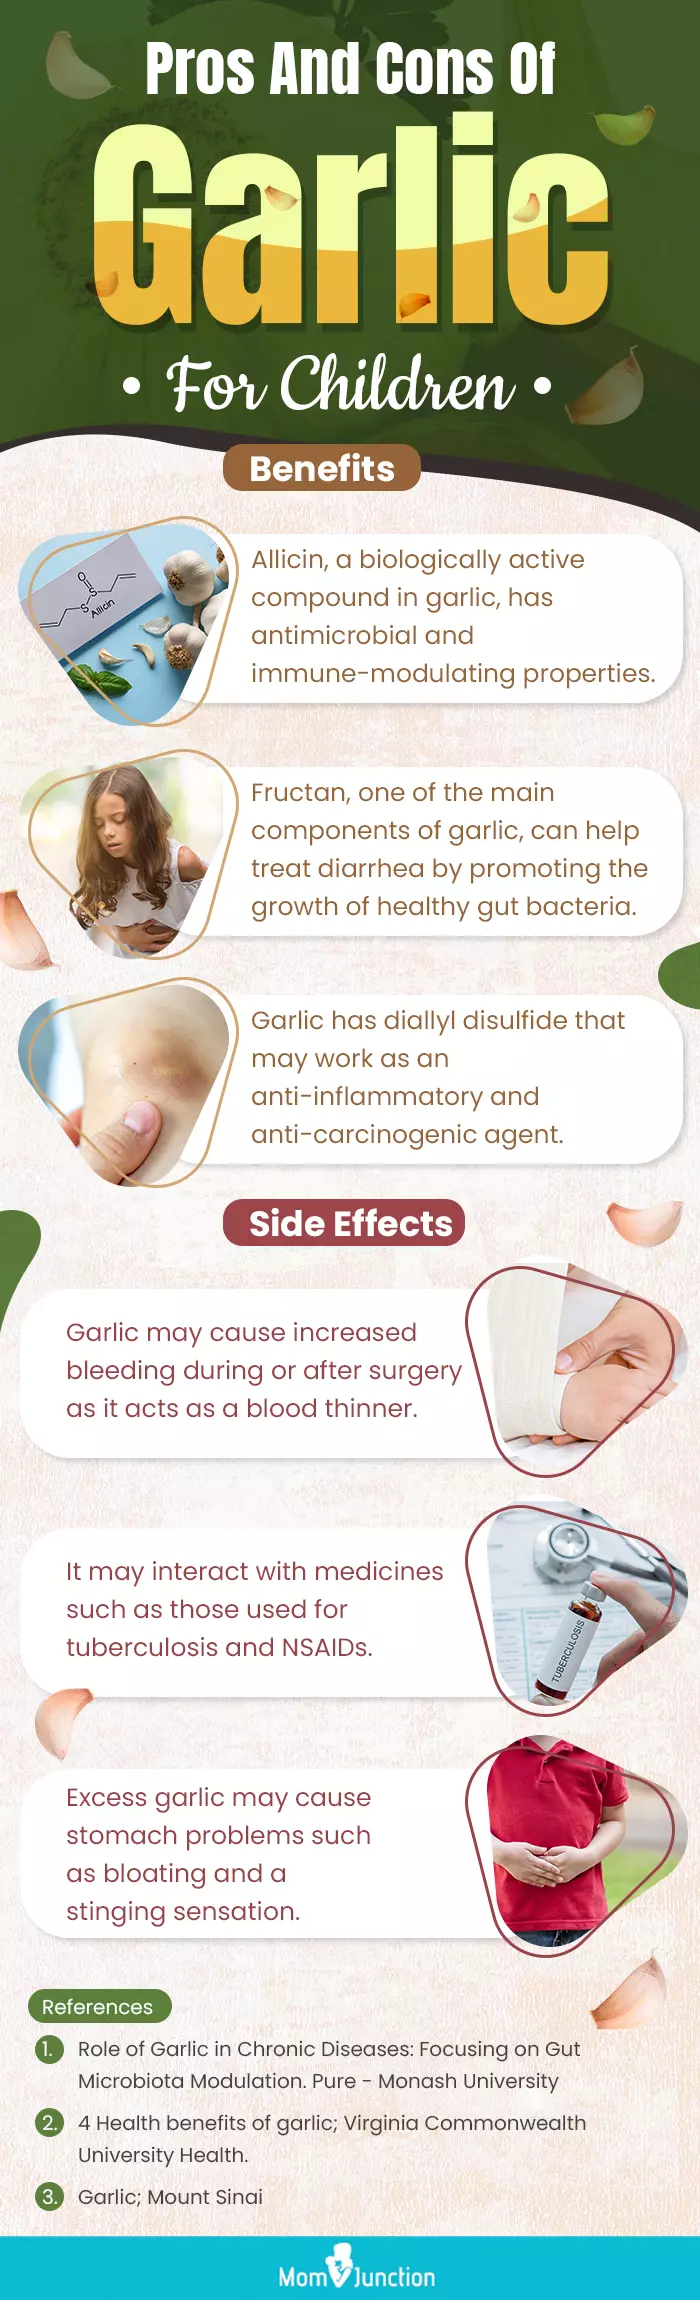 pros and cons of garlic for children (infographic)